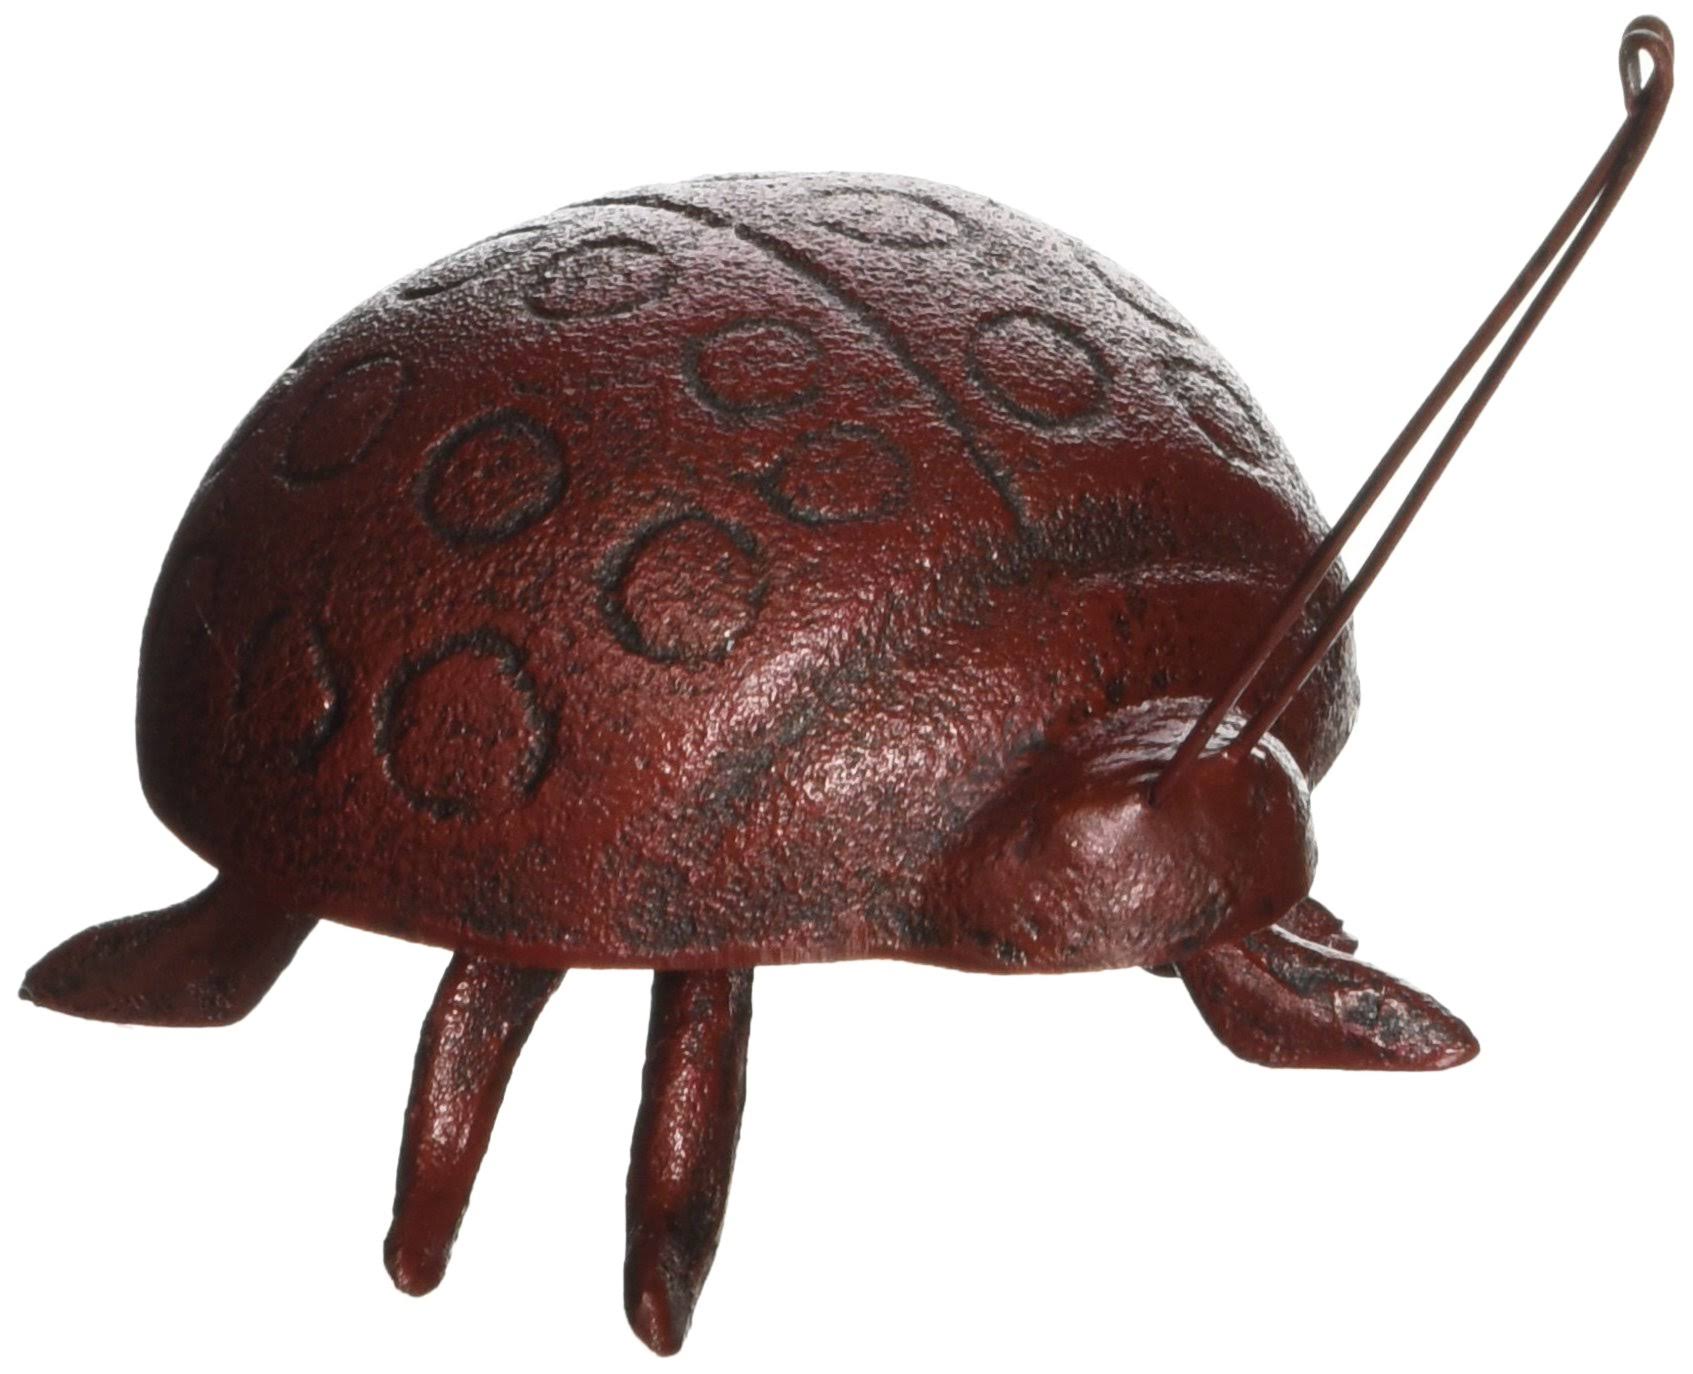 Abbott Collection Ladybug Figurine, Small Cast Iron 3' x 5' Long, Red